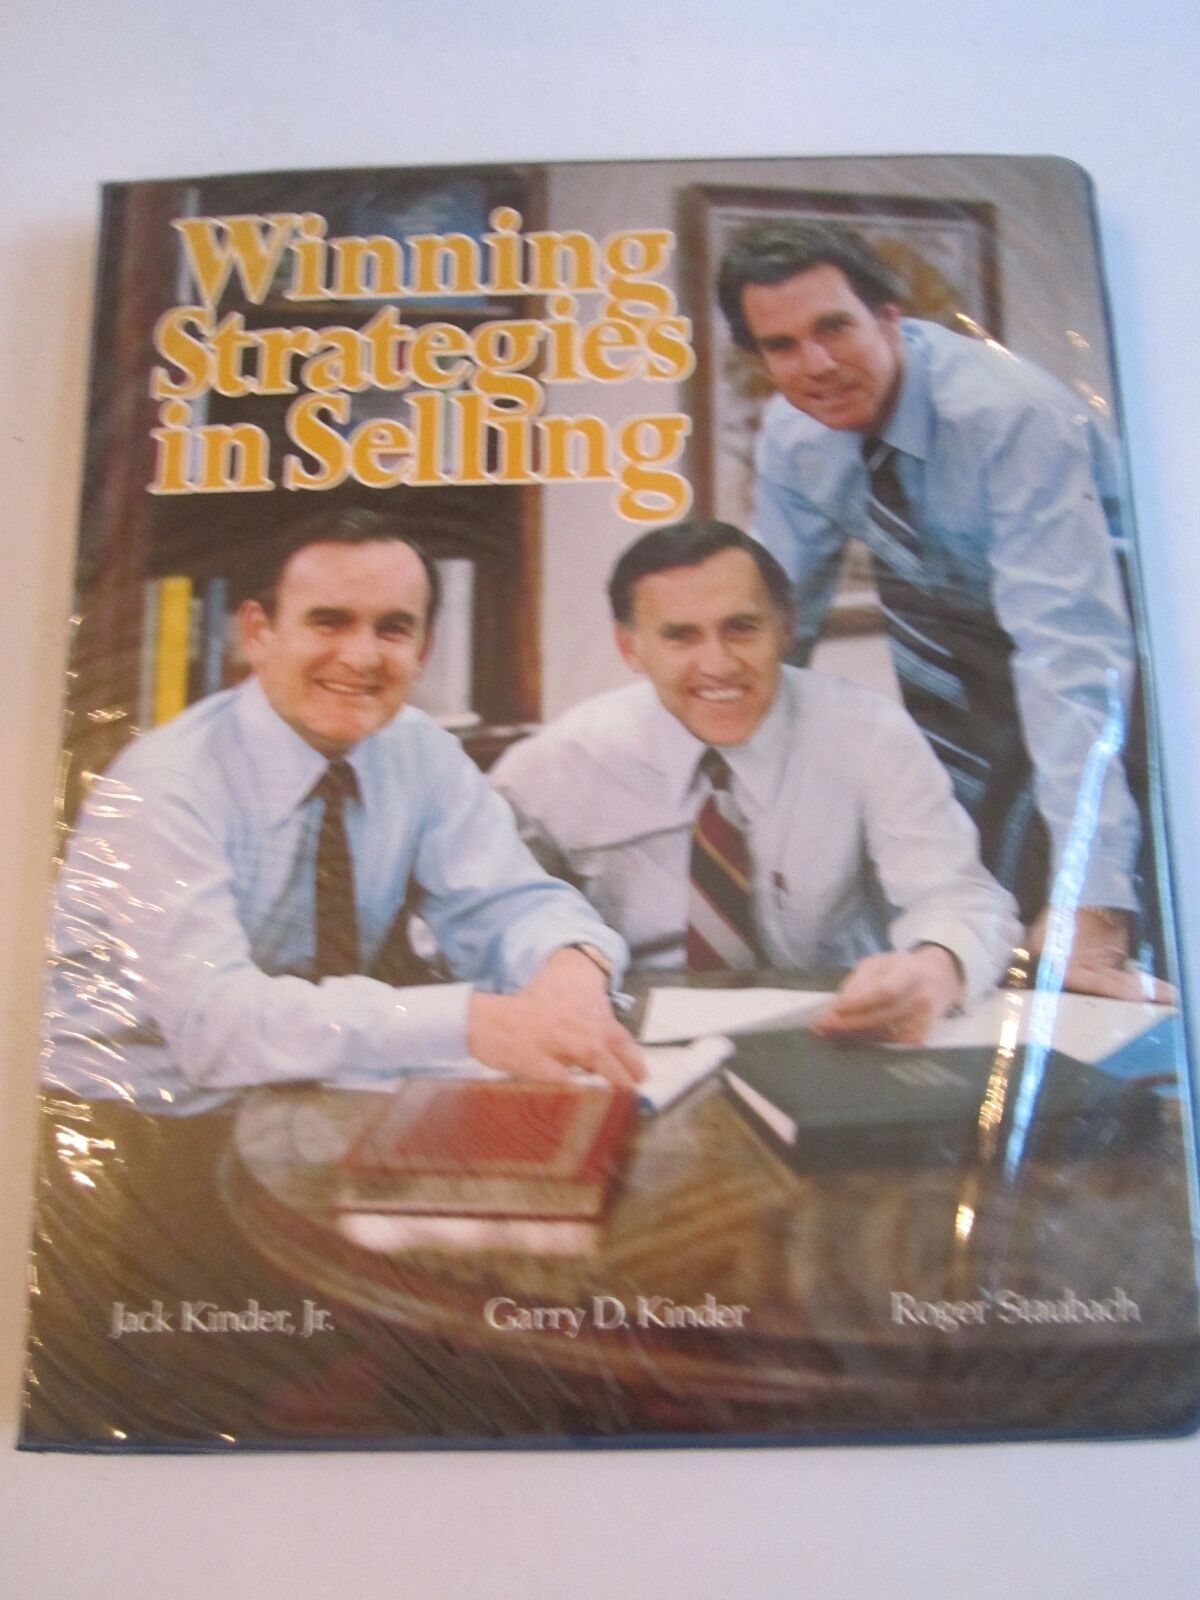 1982 ROGER STAUBACH - WINNING STRATEGIES IN SELLING CASSETTE TAPES  - HD